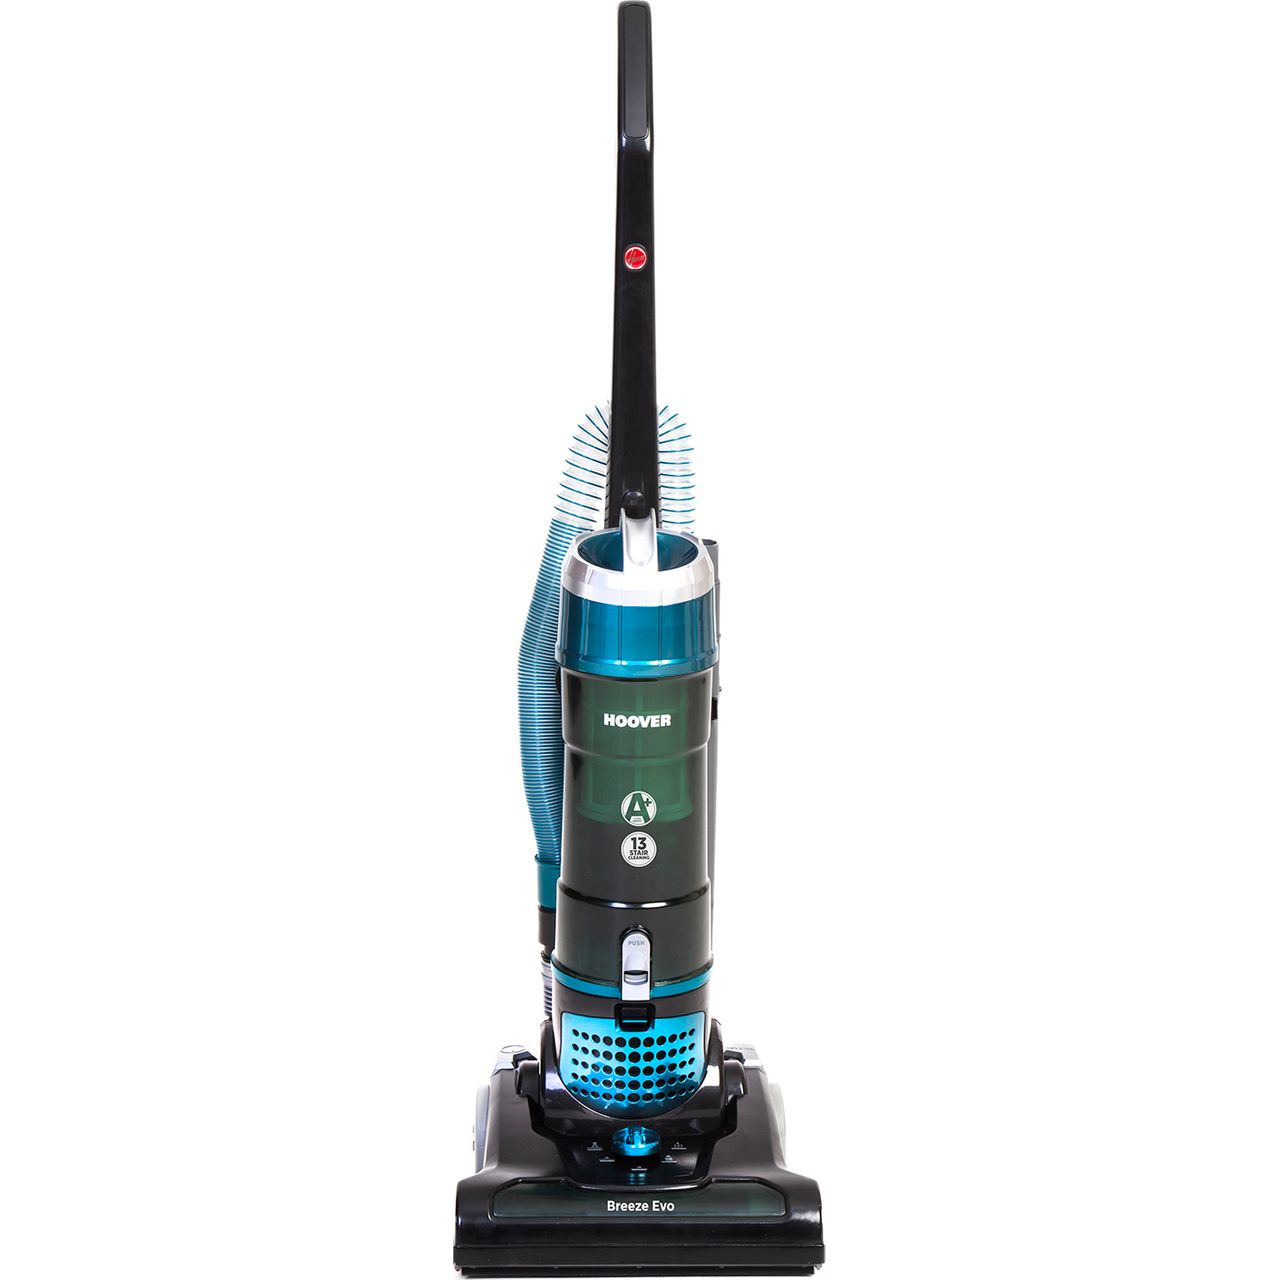 Hoover BREEZE EVO TH31 BO01 Upright Vacuum Cleaner Review